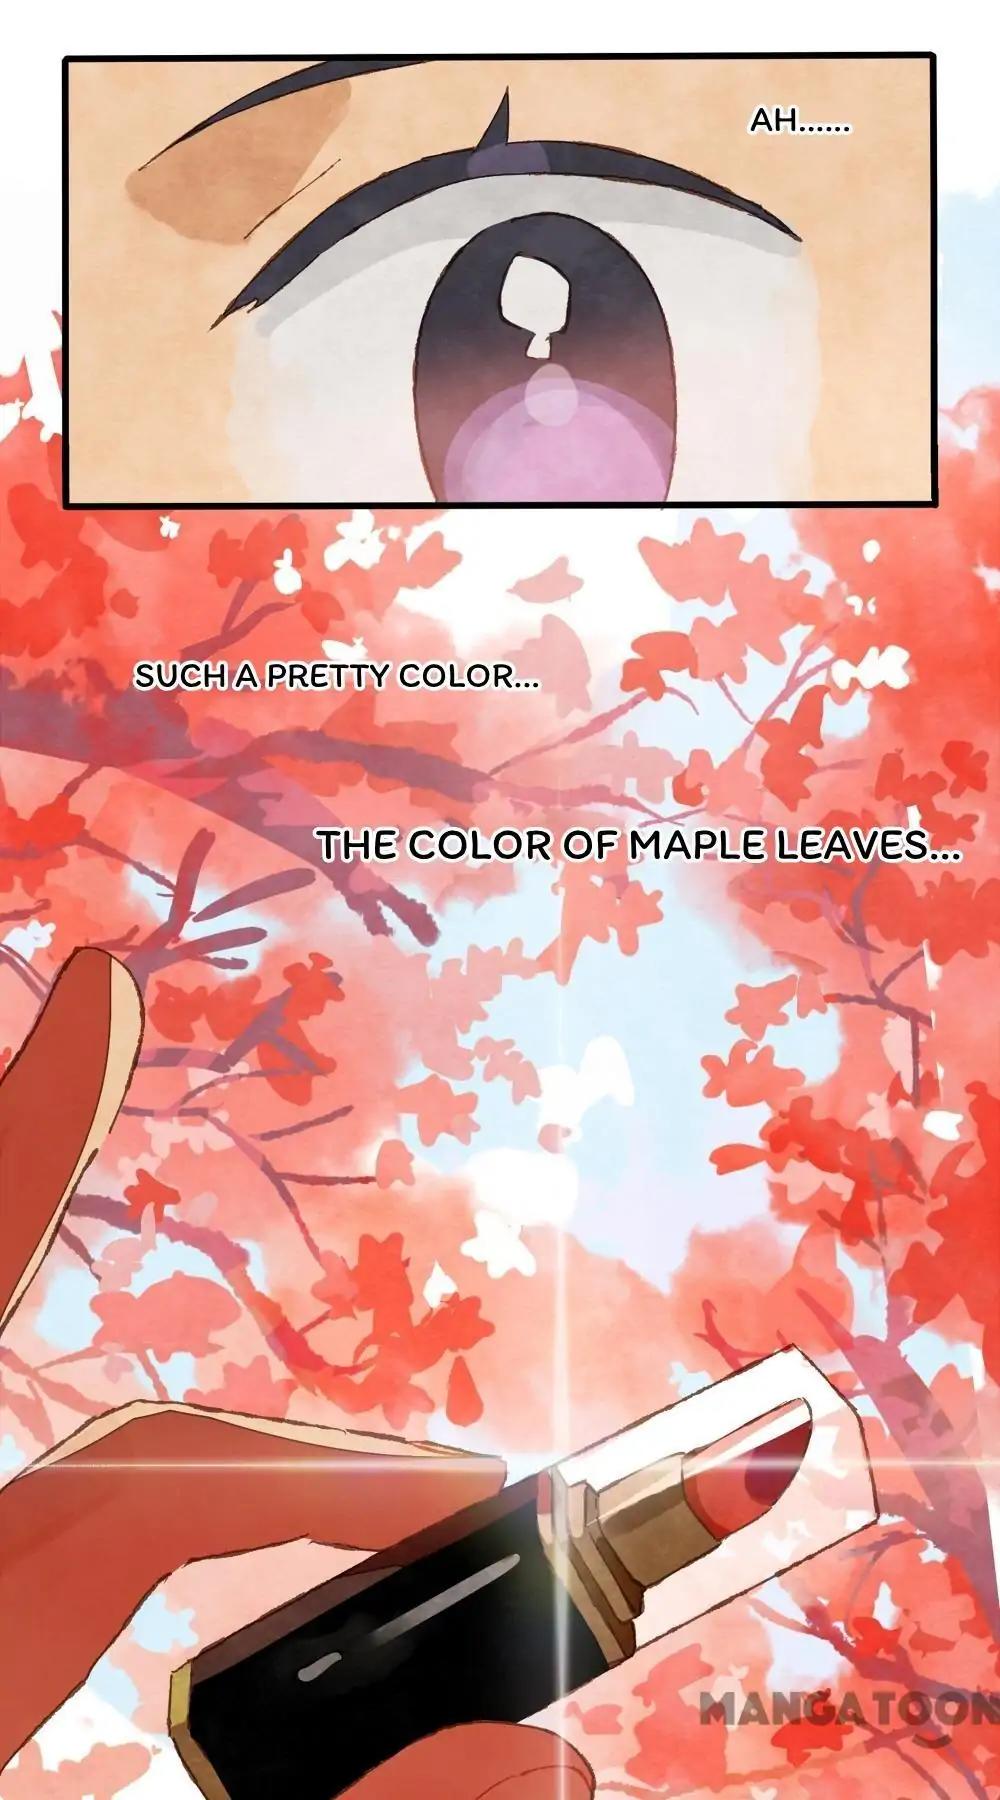 The Wonderful Colors of the Lipsticks Episode 3